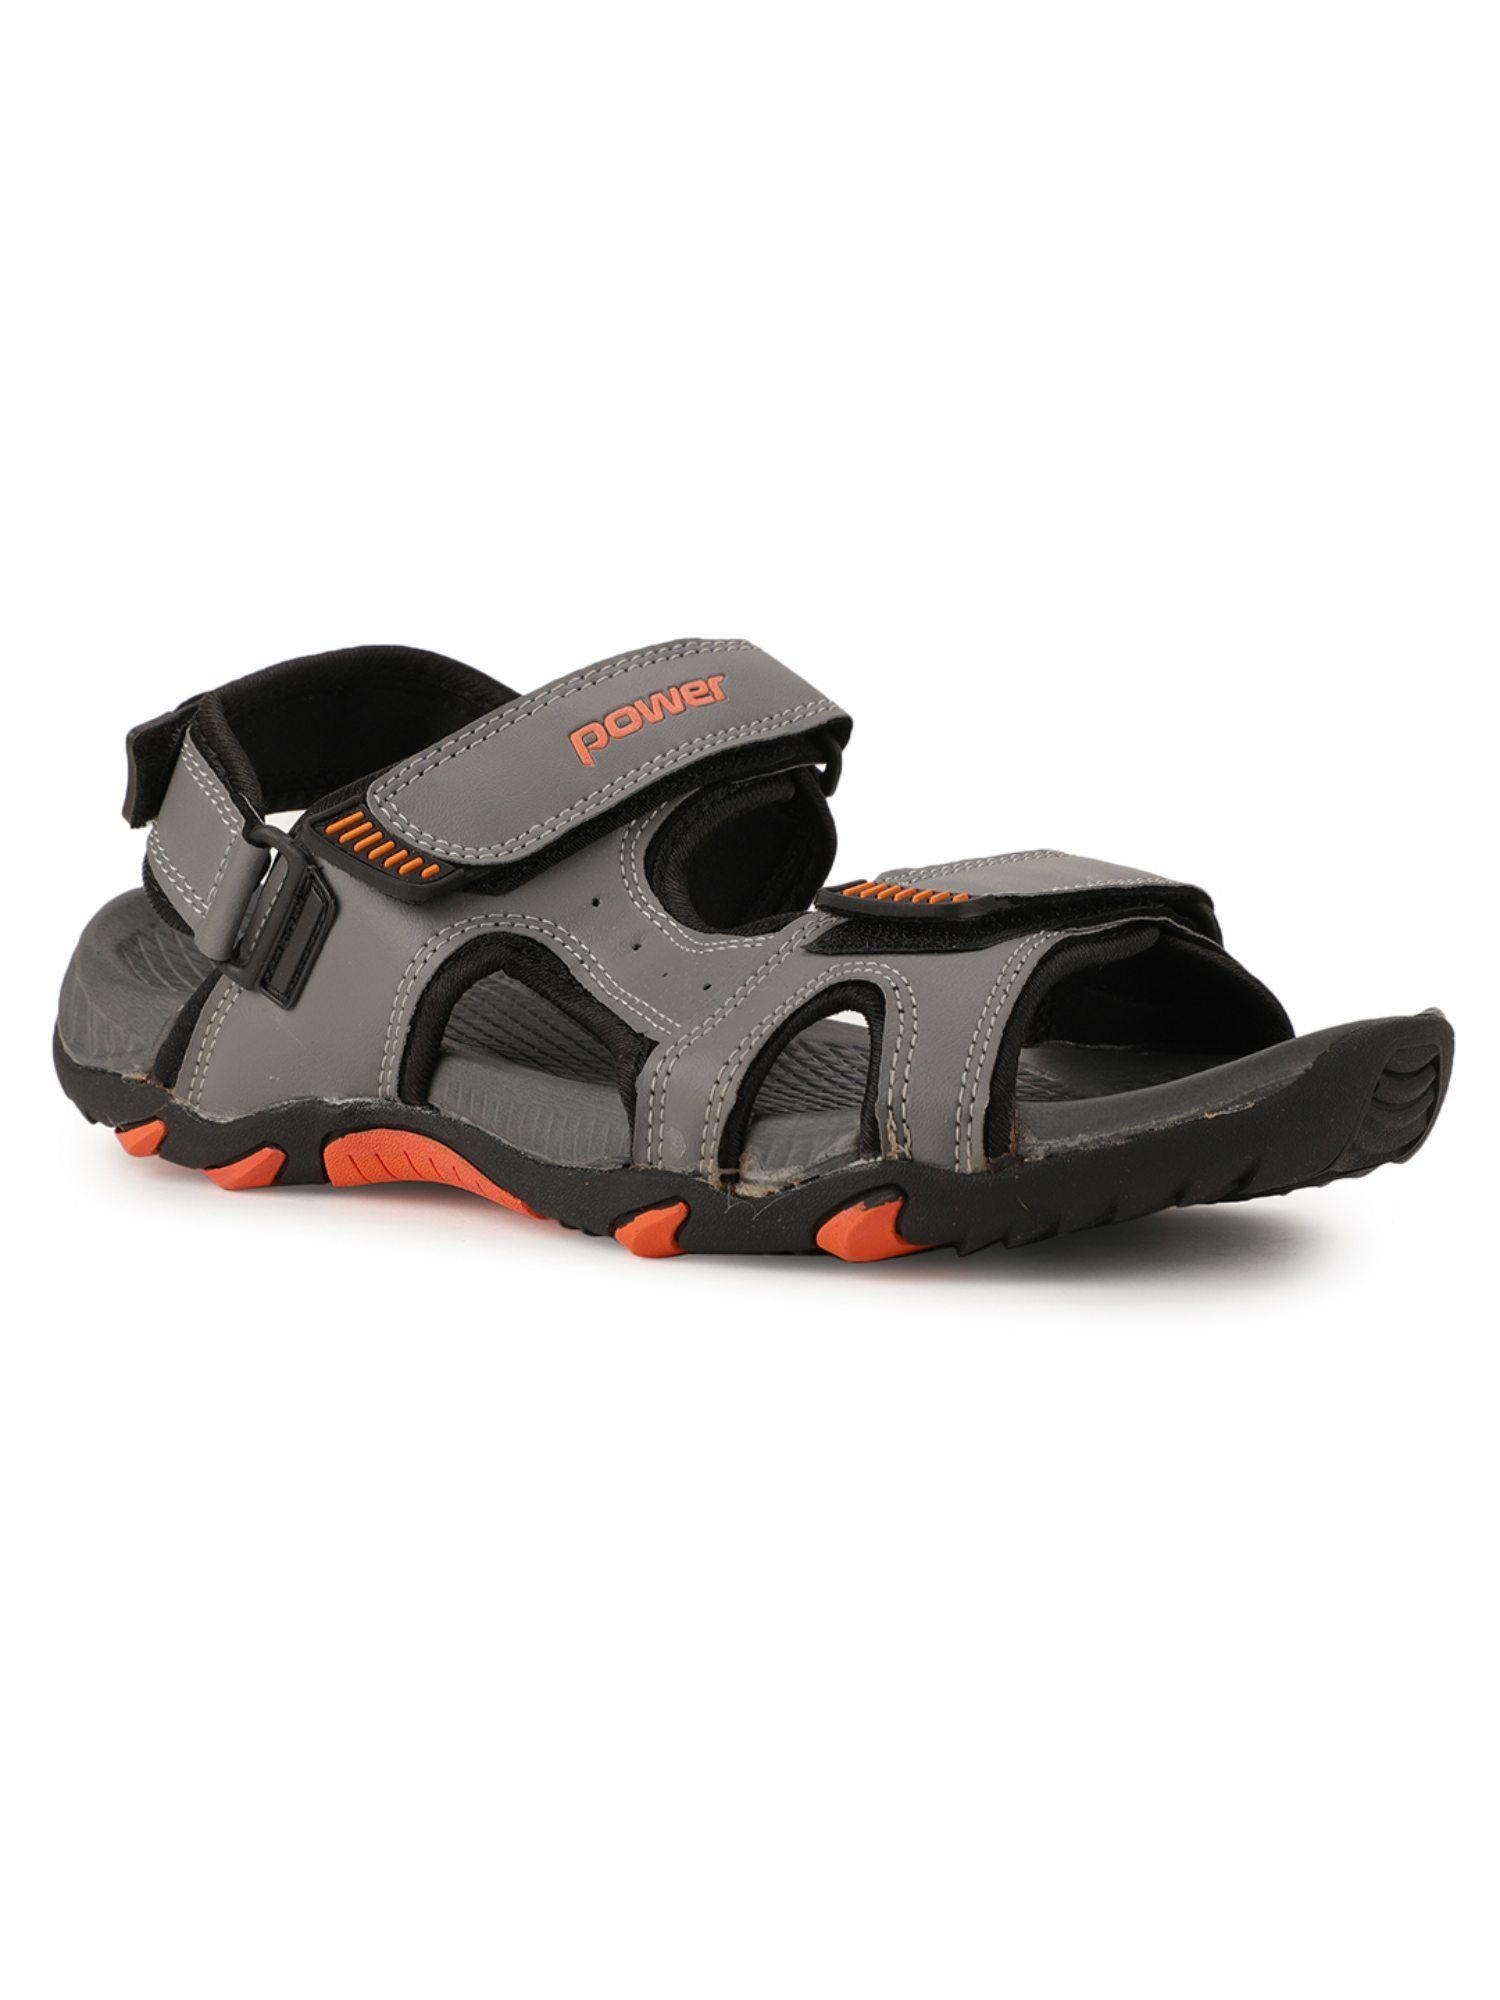 solid grey sports sandals